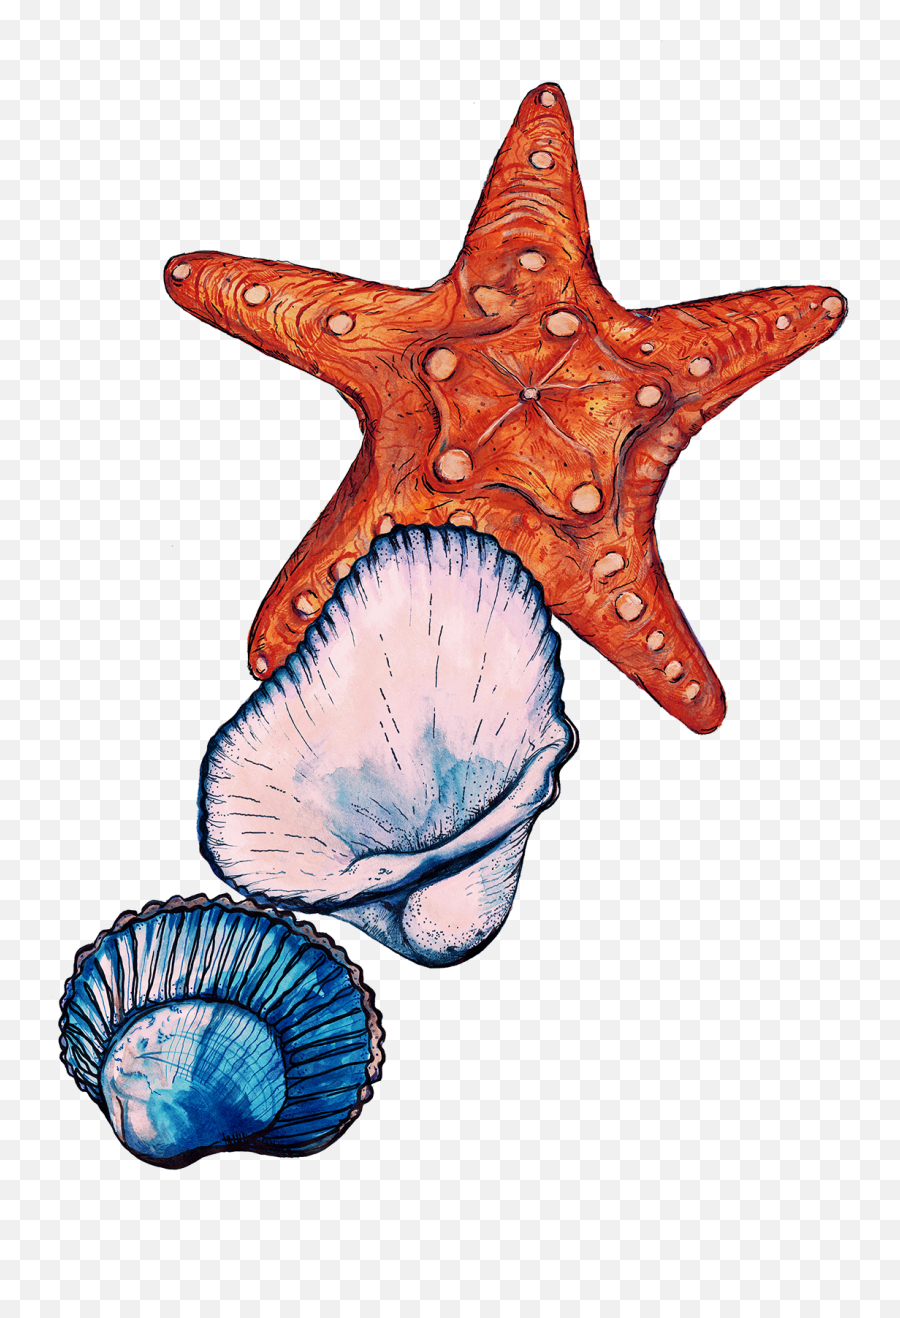 Sign Up To Join The Conversation - Starfish Clipart Full Starfish Emoji,Starfish Clipart